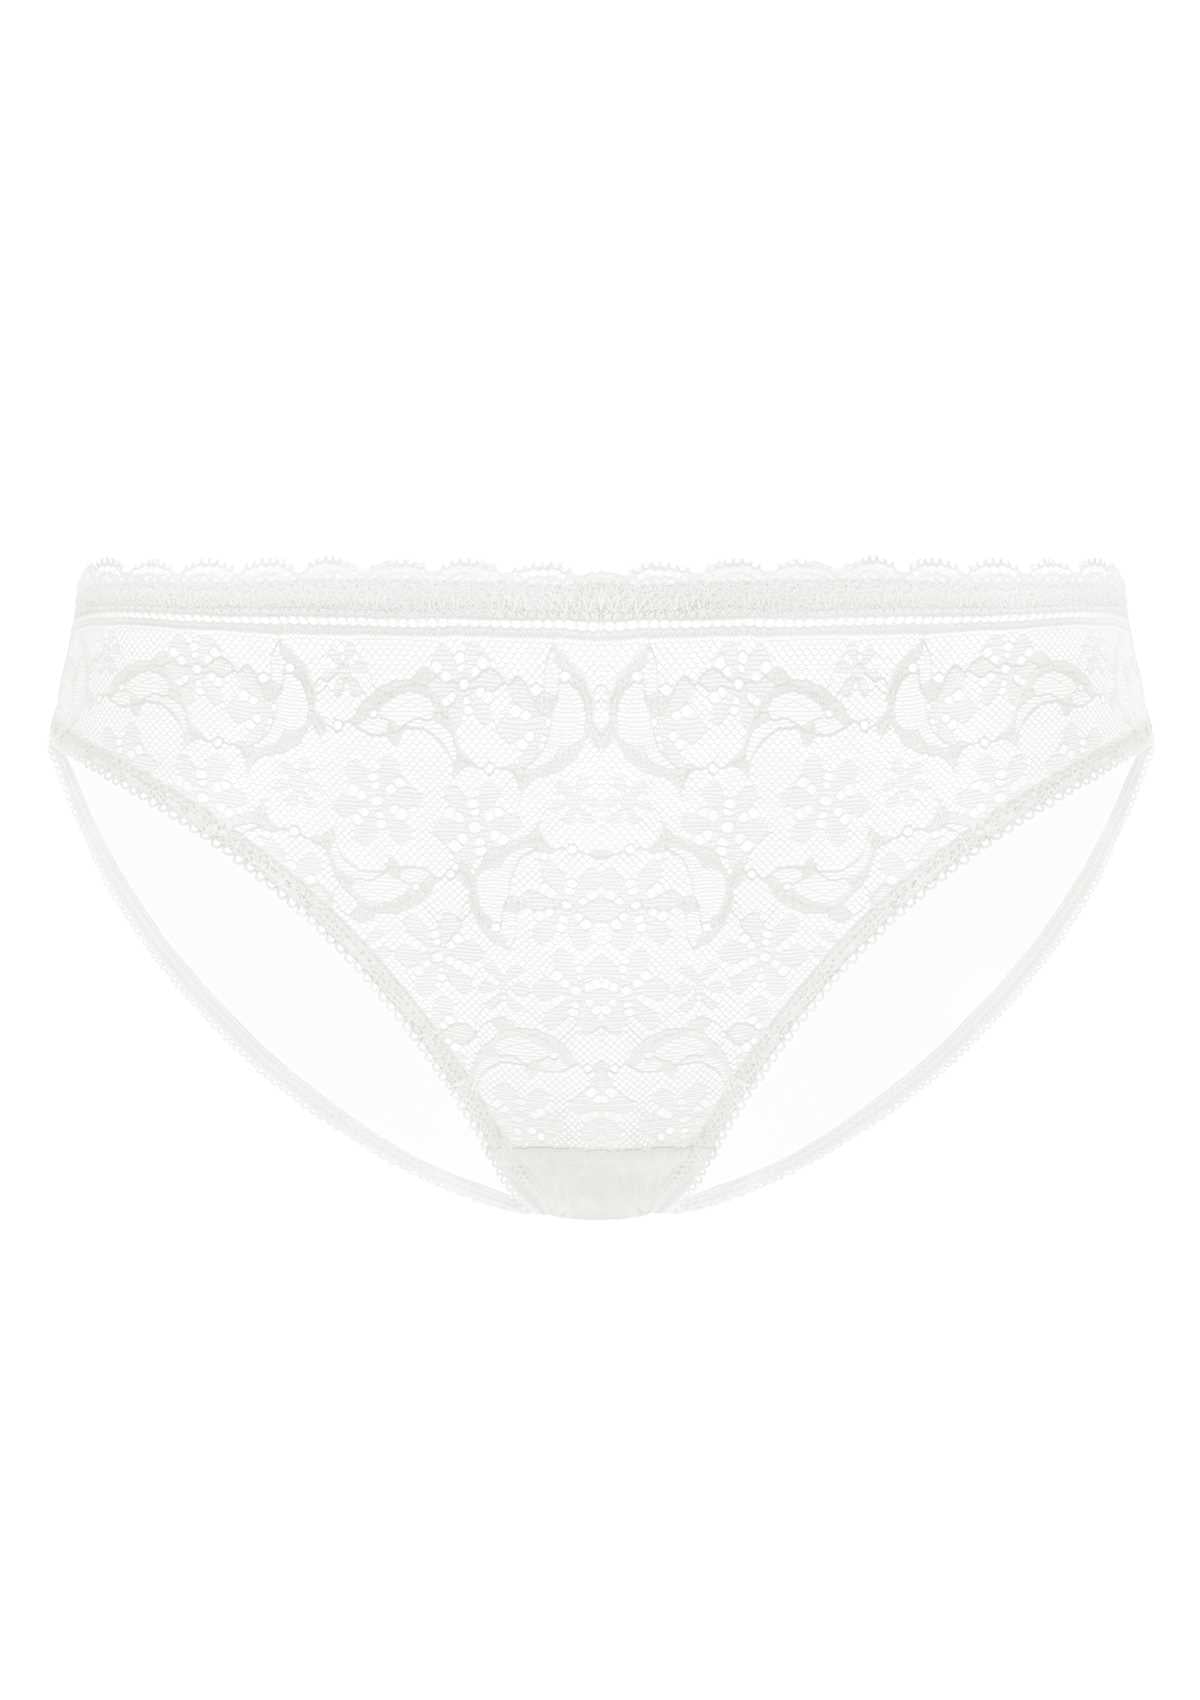 HSIA Anemone Lace Dolphin-Patterned Front And Mesh Back Panties-3 Pack - S / Black+Burgundy+White